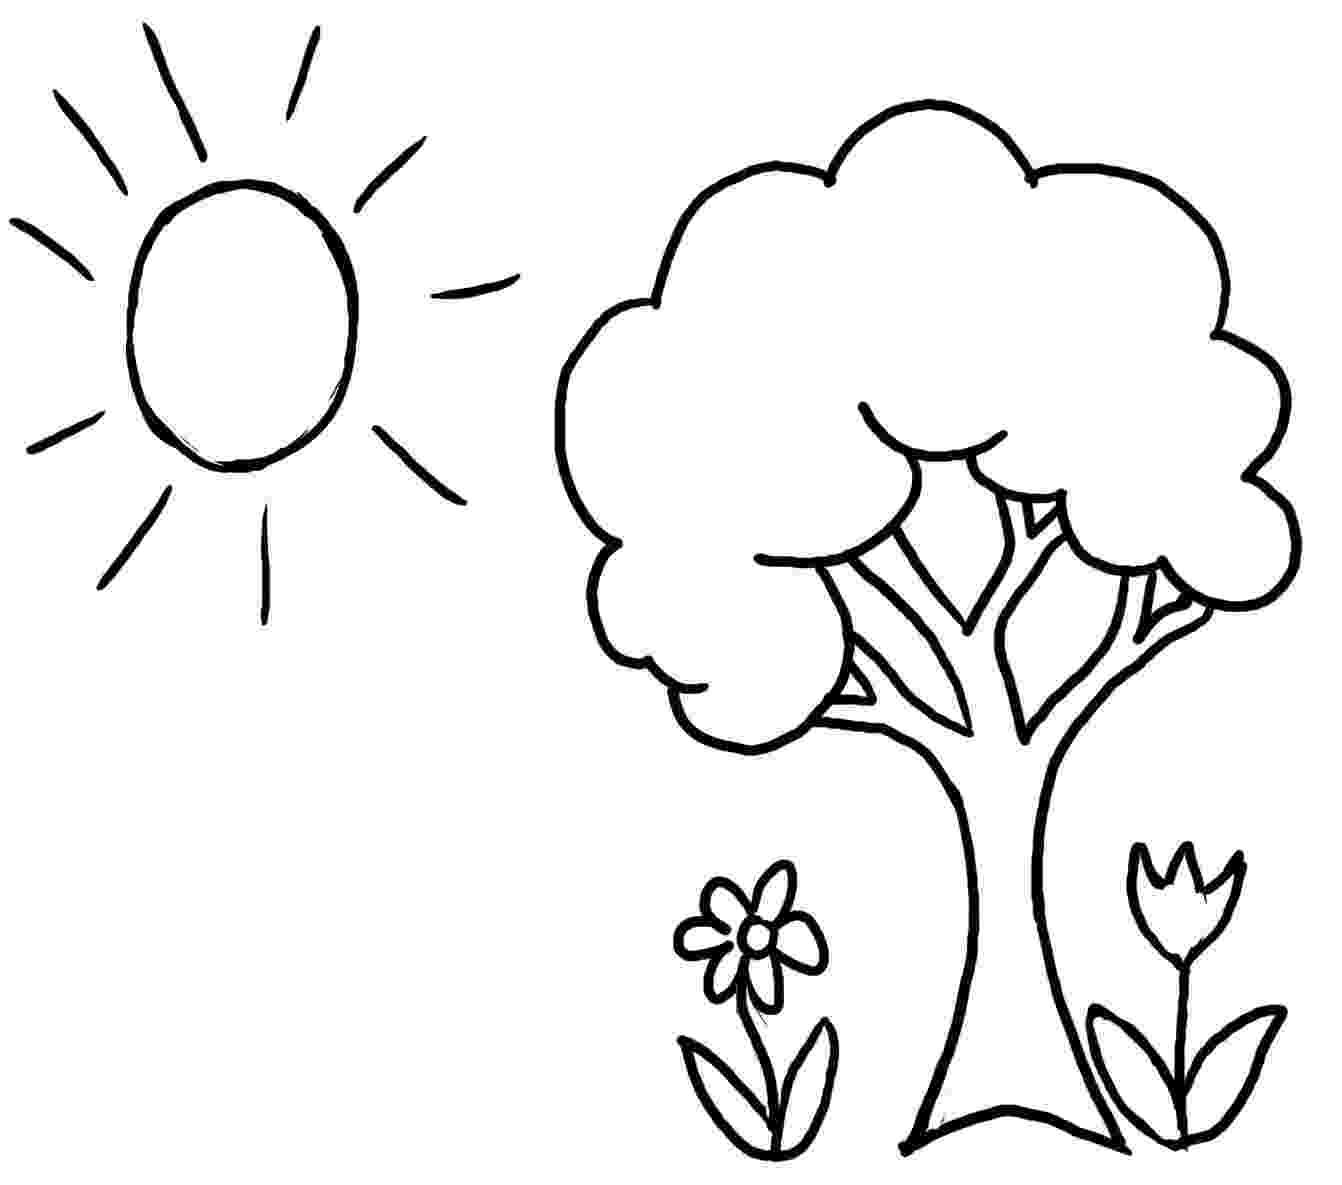 tree images for colouring free trees coloring pages printable trees coloring tree colouring for images 